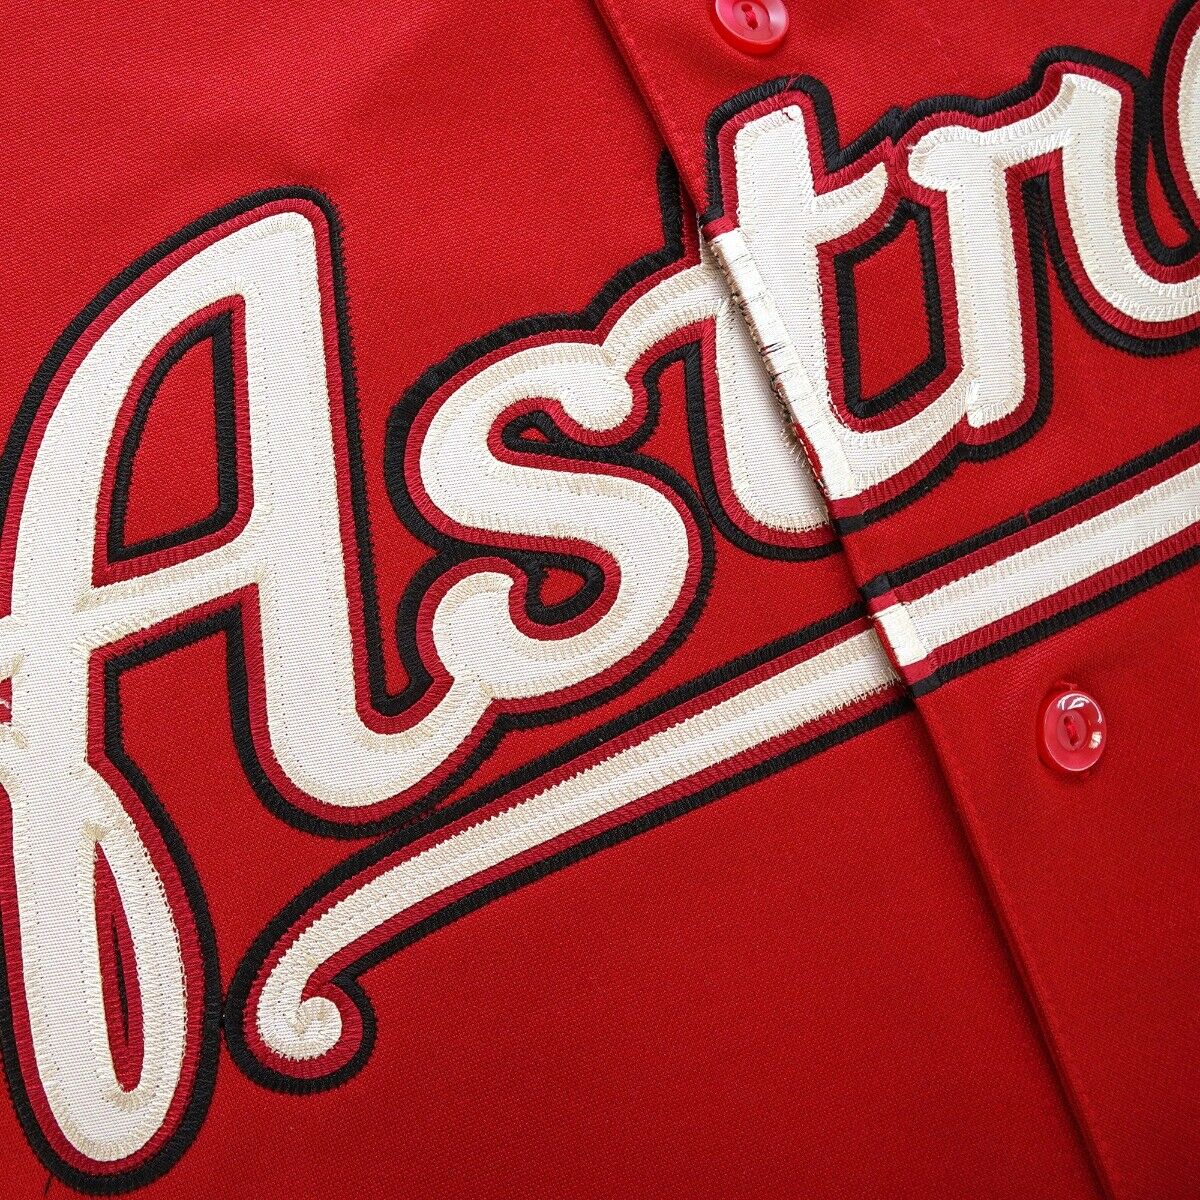 Custom 2012 Houston Astros Red Men's Jersey Stitched